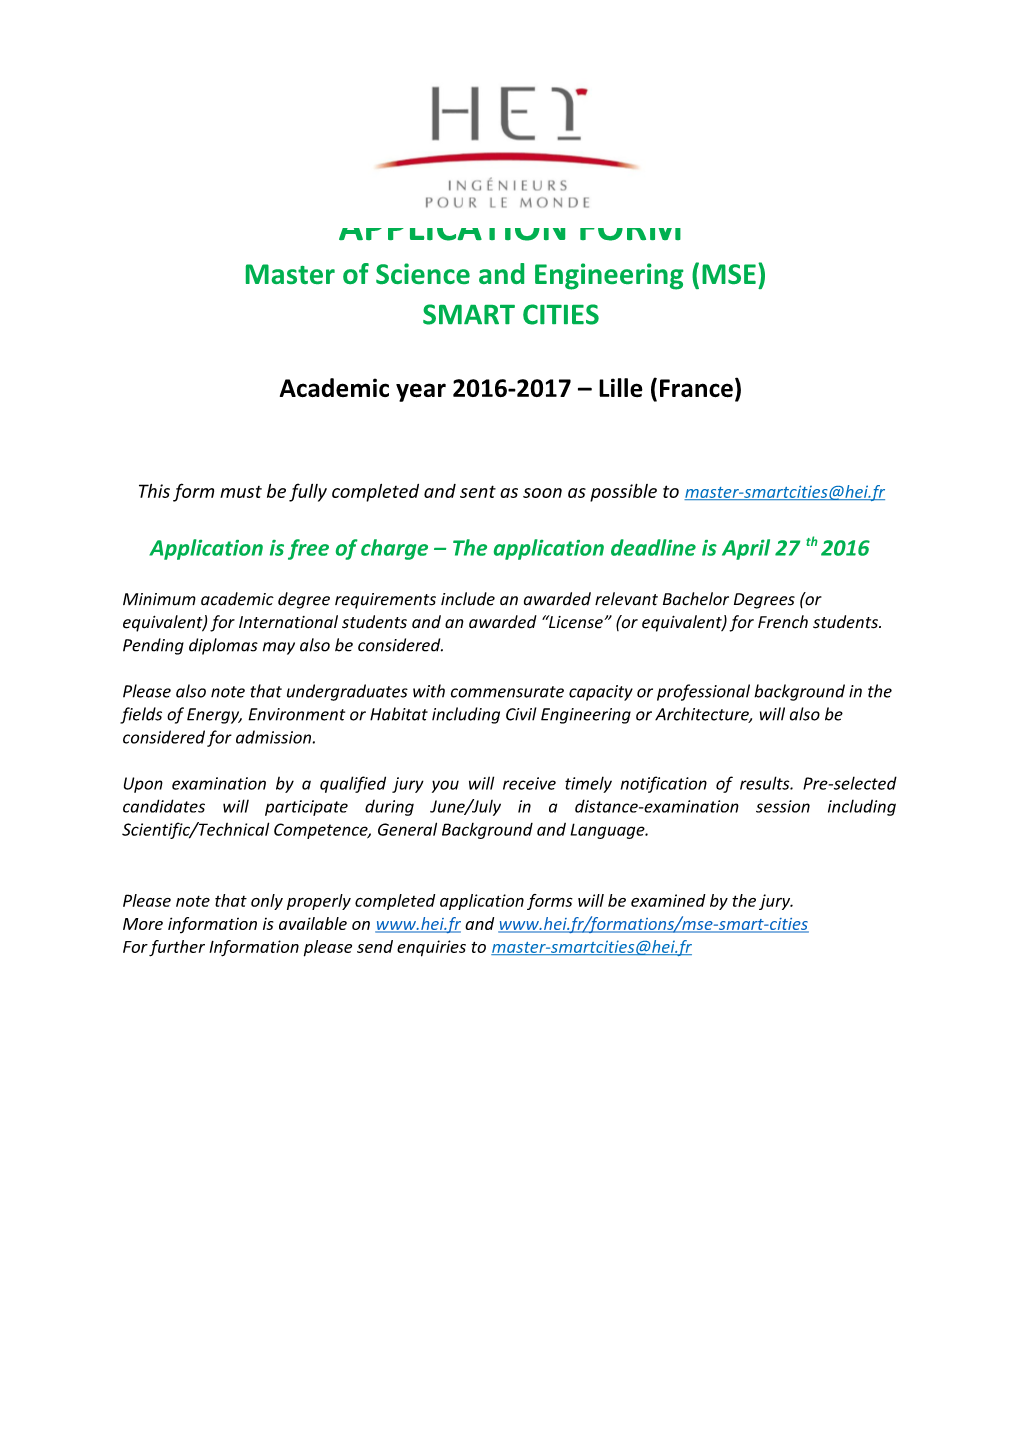 Master of Science and Engineering SMART CITIES - APPLICATION FORM - SECTION 1/3